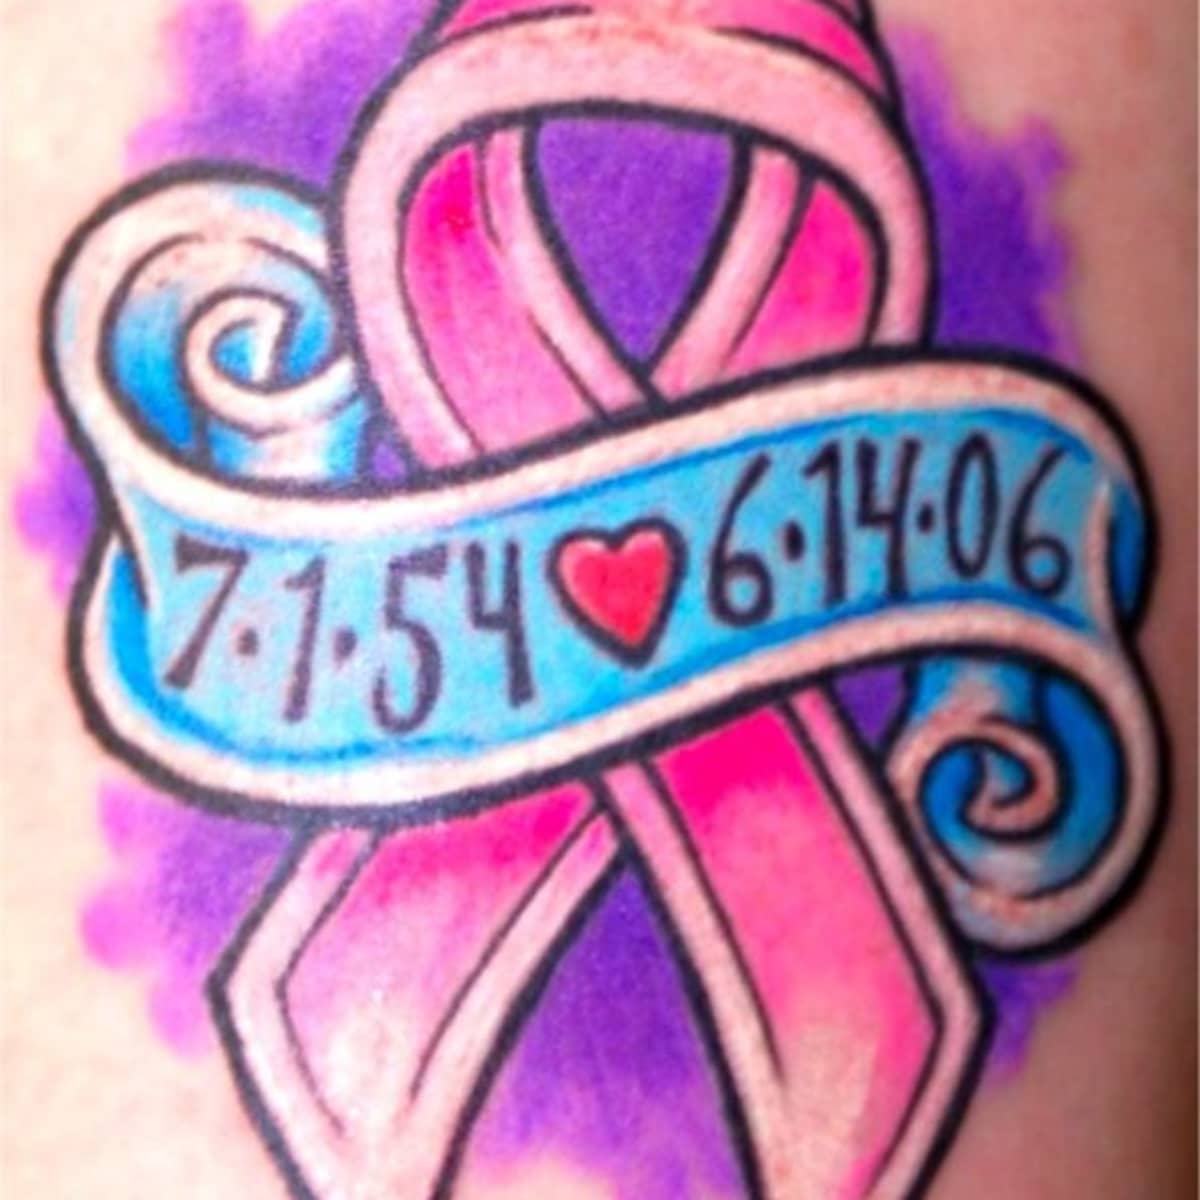 Paps and Tats Lower Kootenay Band promotes cervical cancer screening with  free tattoos  The Free Press